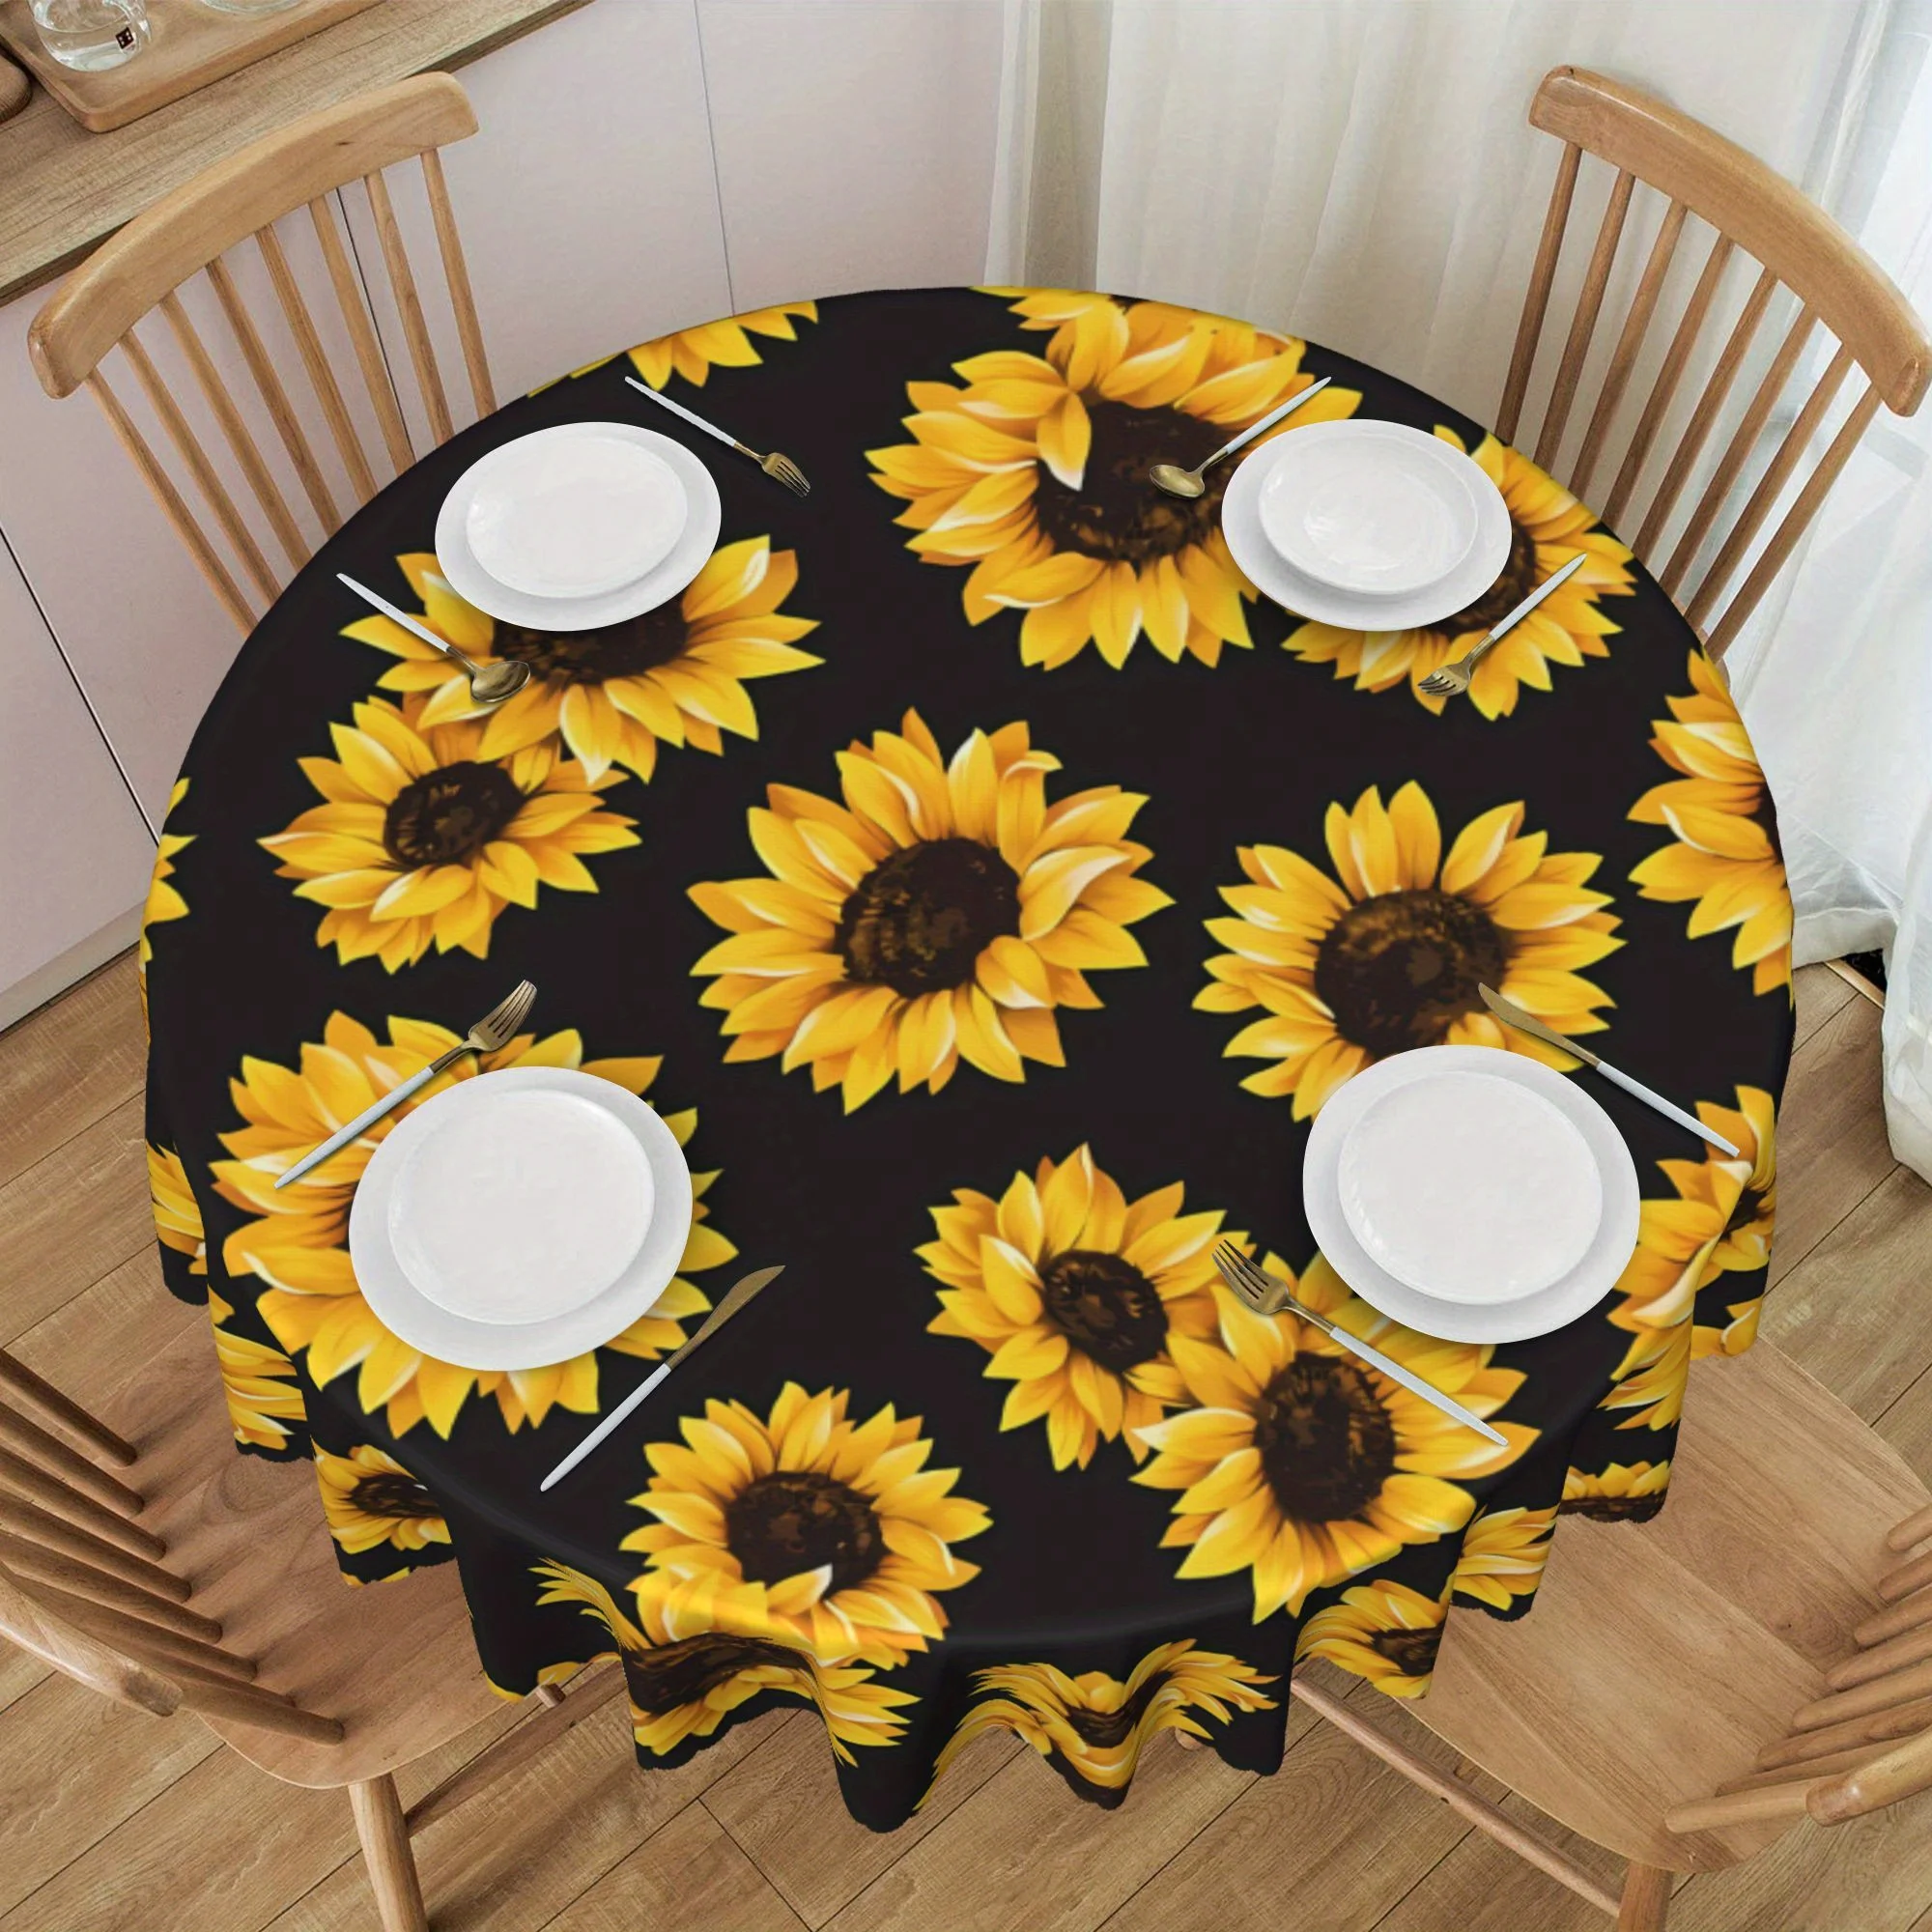 Sunflower Print Decoration Living Room Kitchen Dustproof Round Tablecloth Holiday Outdoor Party Dinner Decoration Accessories